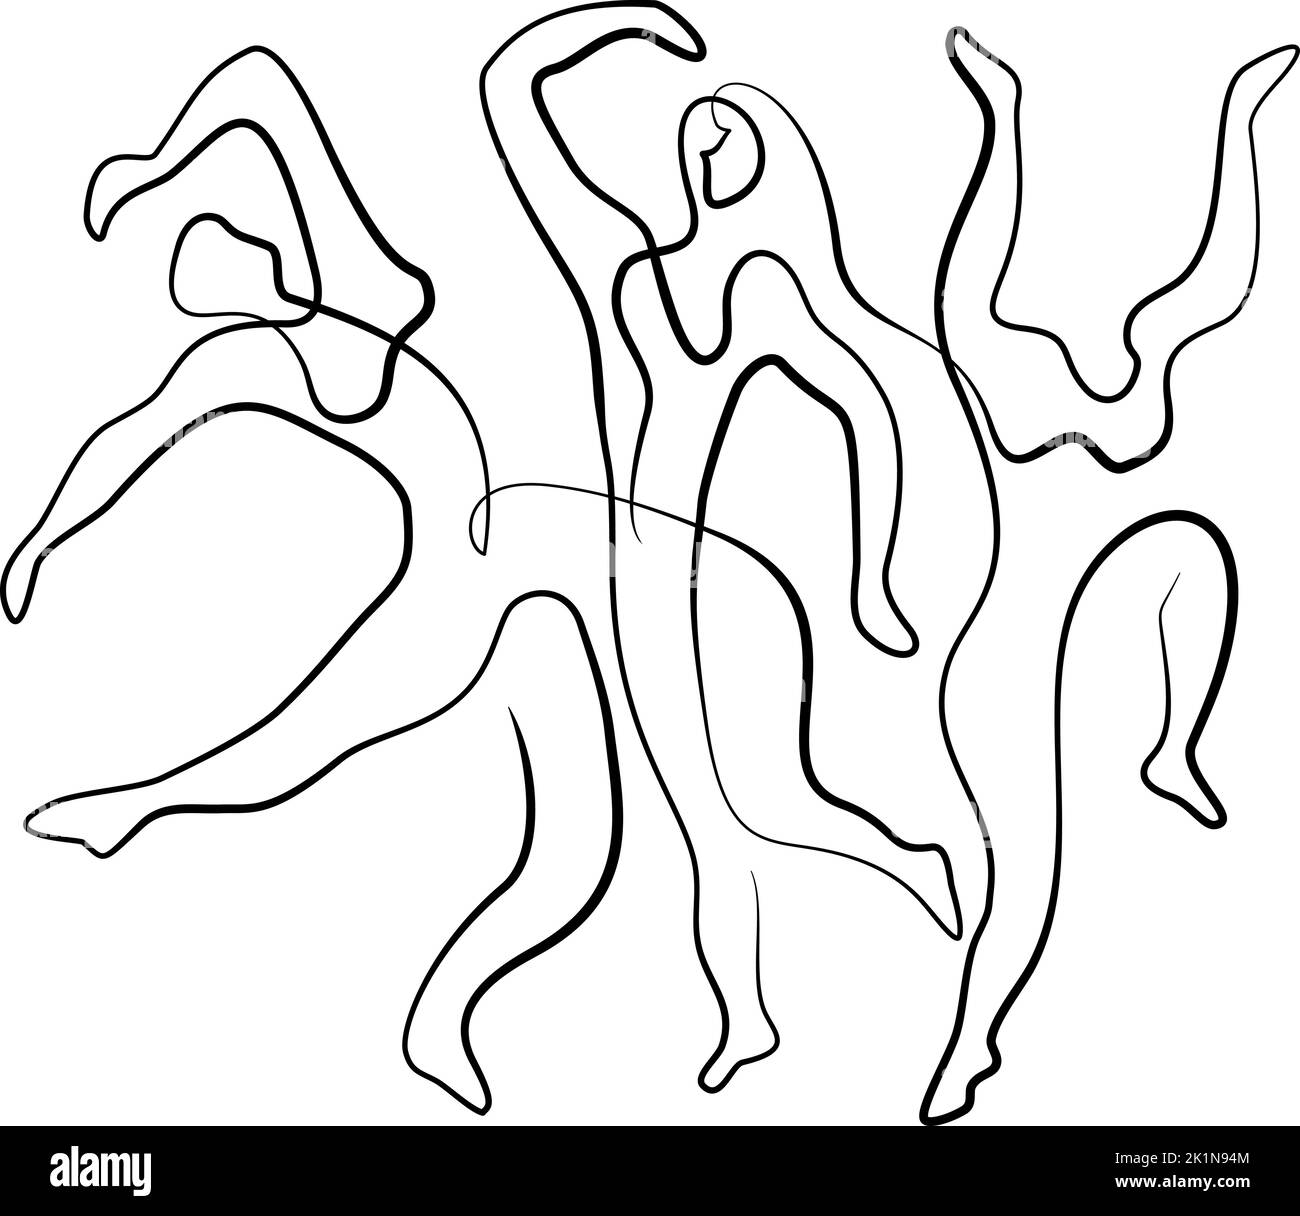 Three dancers based on drawing by Picasso. Black and white illustration of dancing figures. Continuous One line art drawing style. Vector illustration Stock Vector